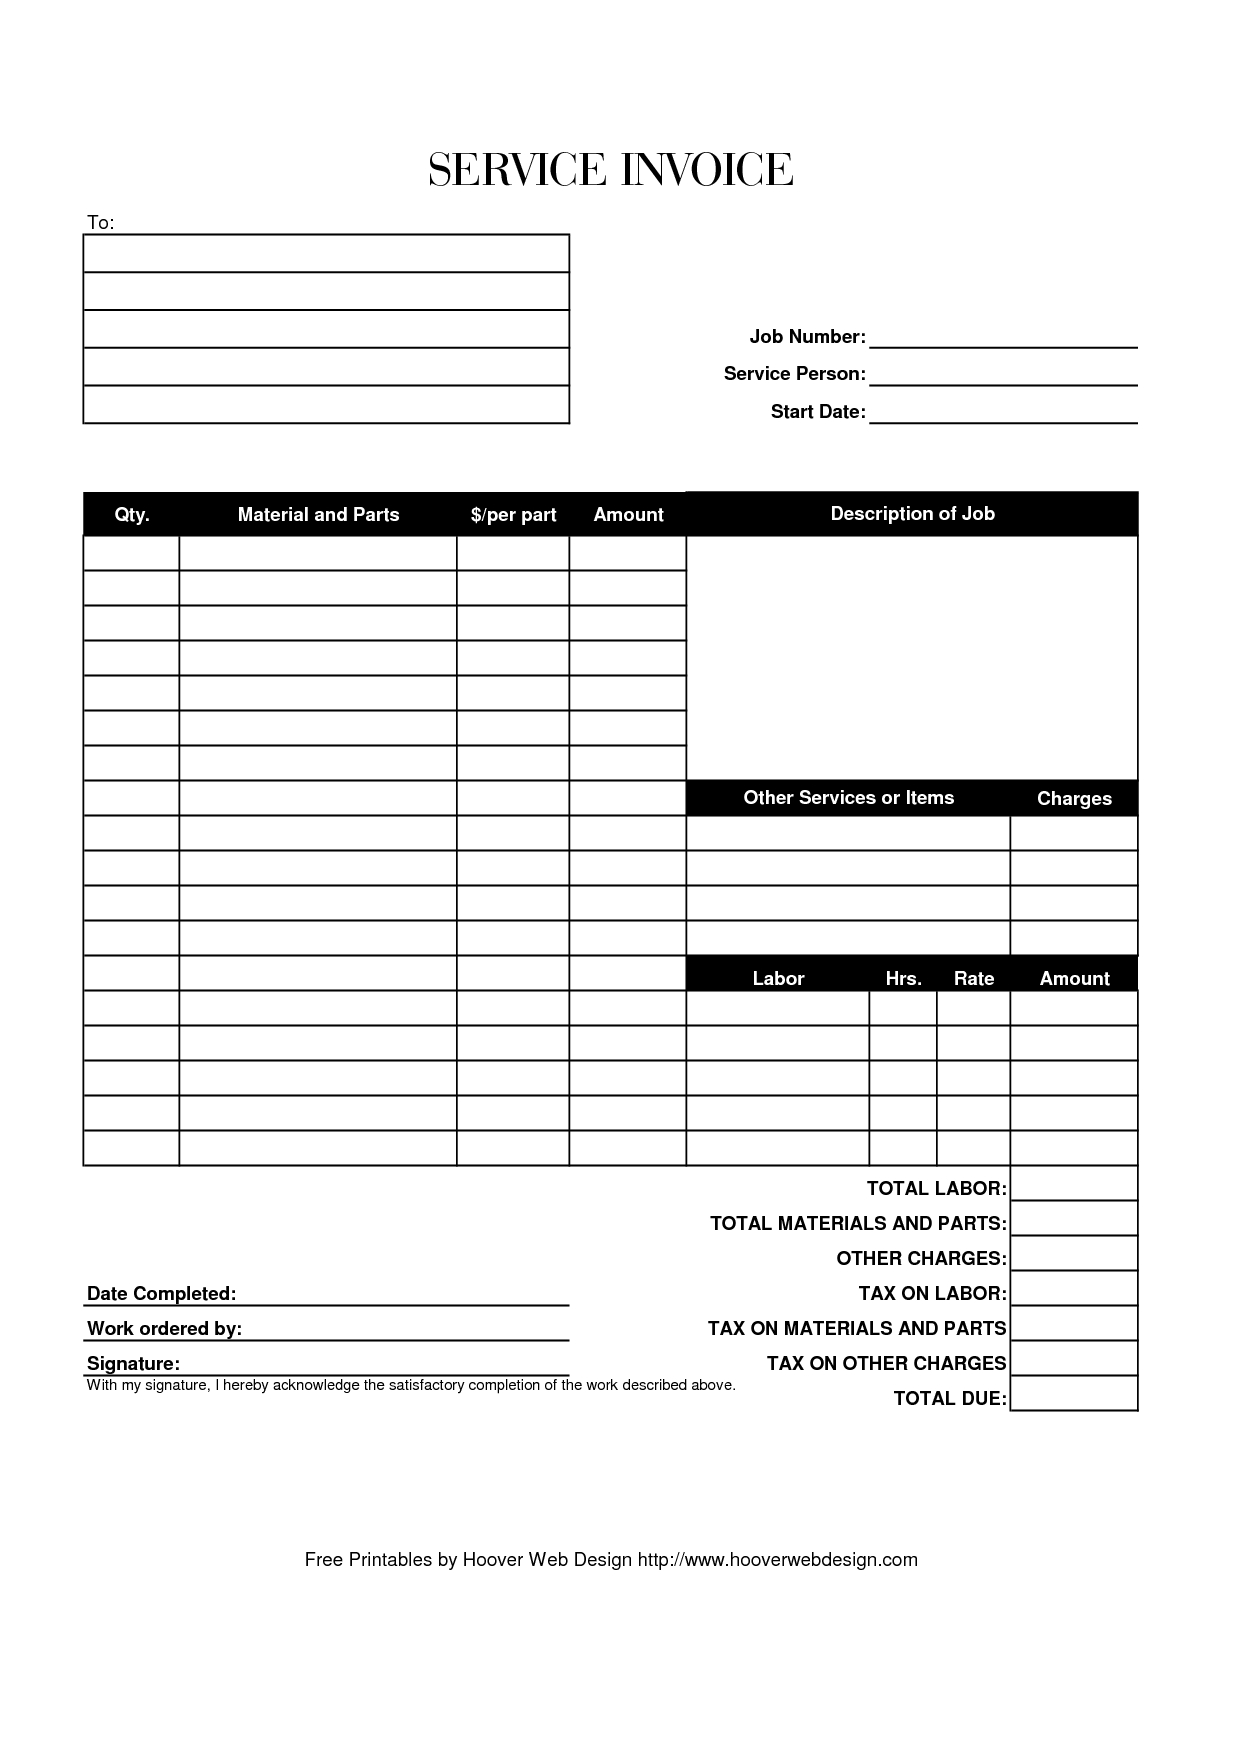 Hoover Receipts | Free Printable Service Invoice Template - Pdf - Free Printable Out Of Service Sign